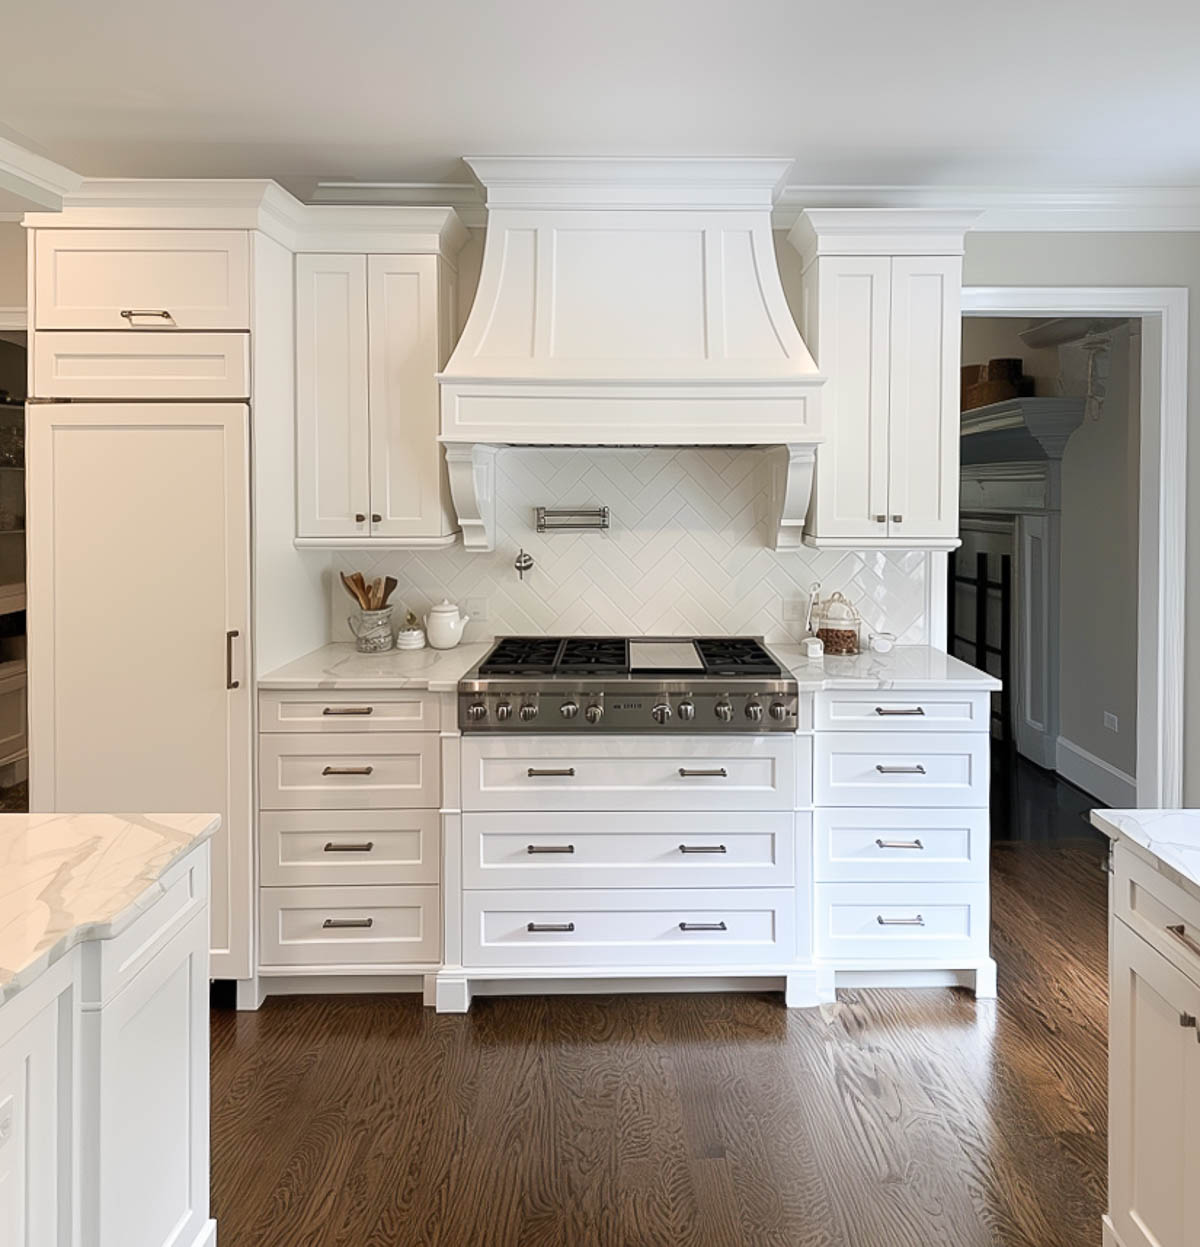 stove with a hood above it in a kitchen with white cabinets and hardwood floors